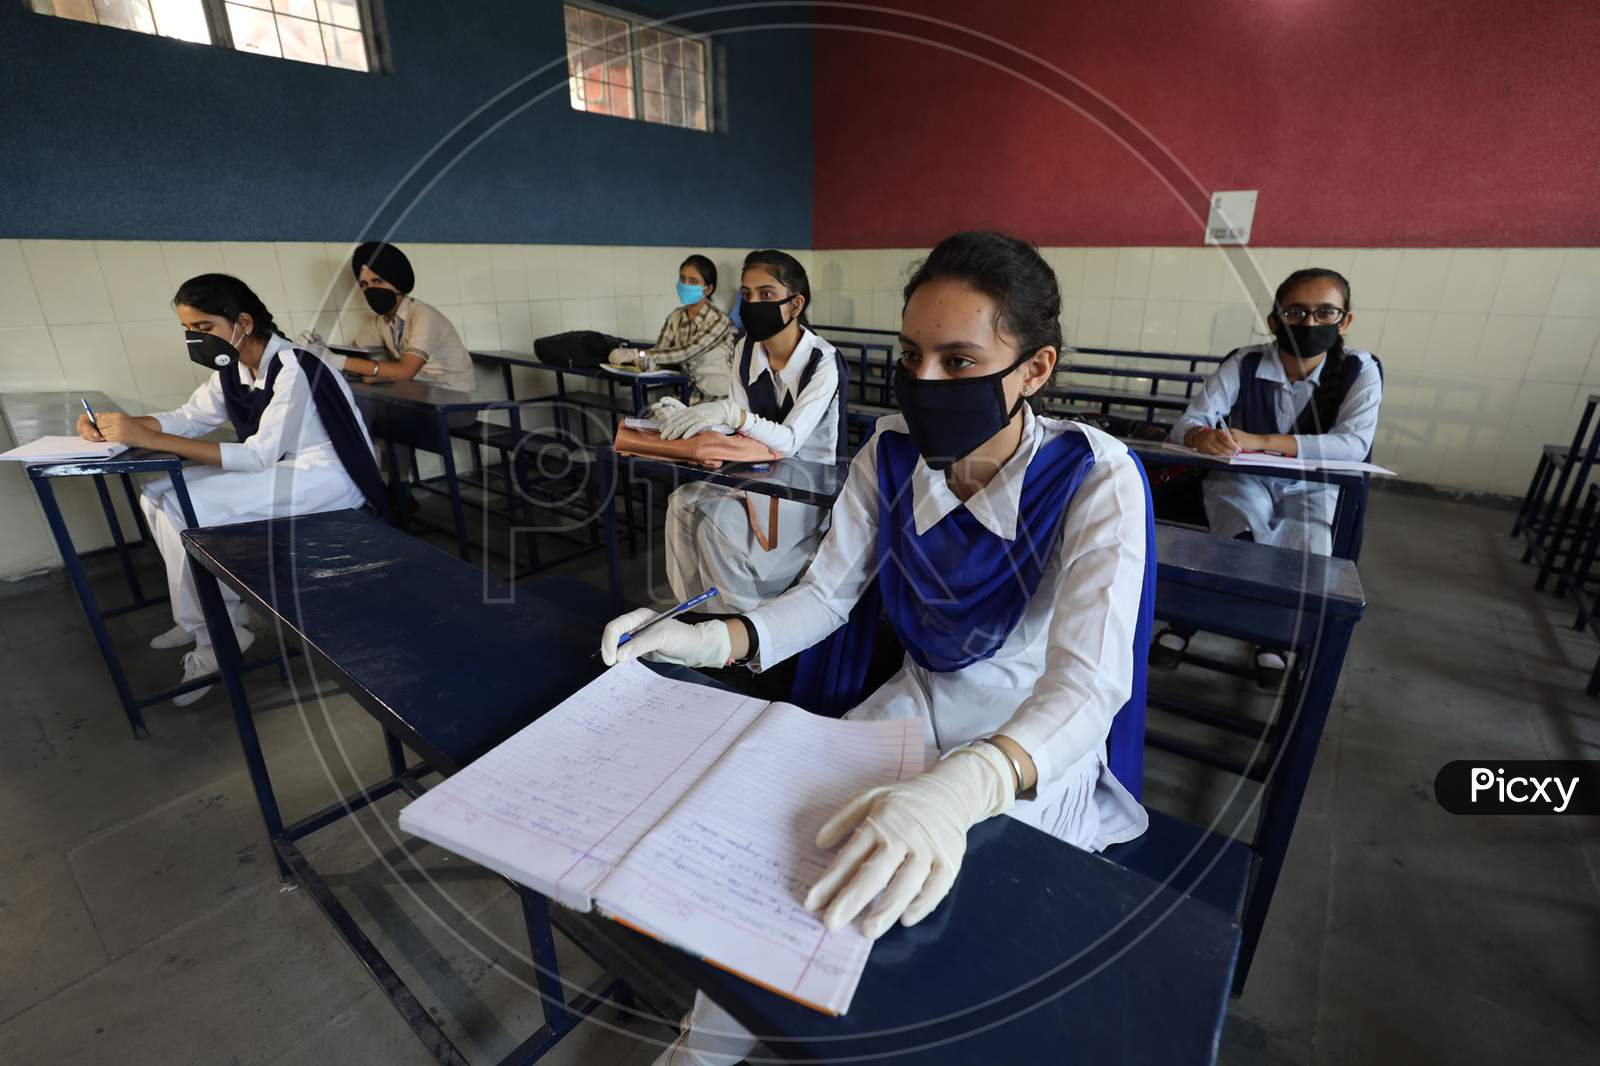 Students attend their school in Jammu on 21 September,2020. The schools across Jammu region partially reopened for 9th to 12th classes after six months closure due to the outbreak of Coronavirus pandemic.